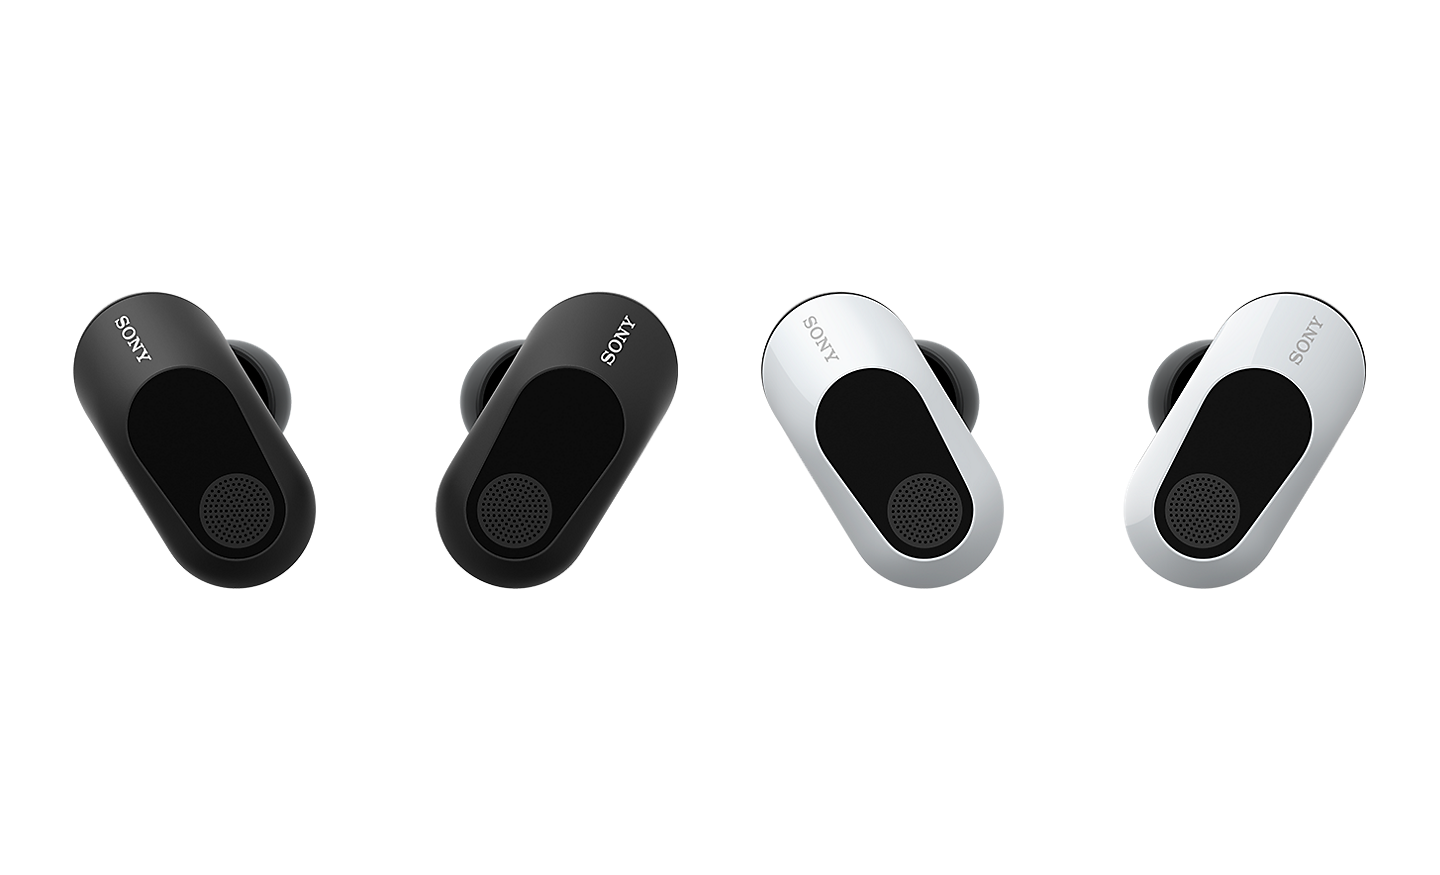 Image of the black and white INZONE Buds headphones on a white background